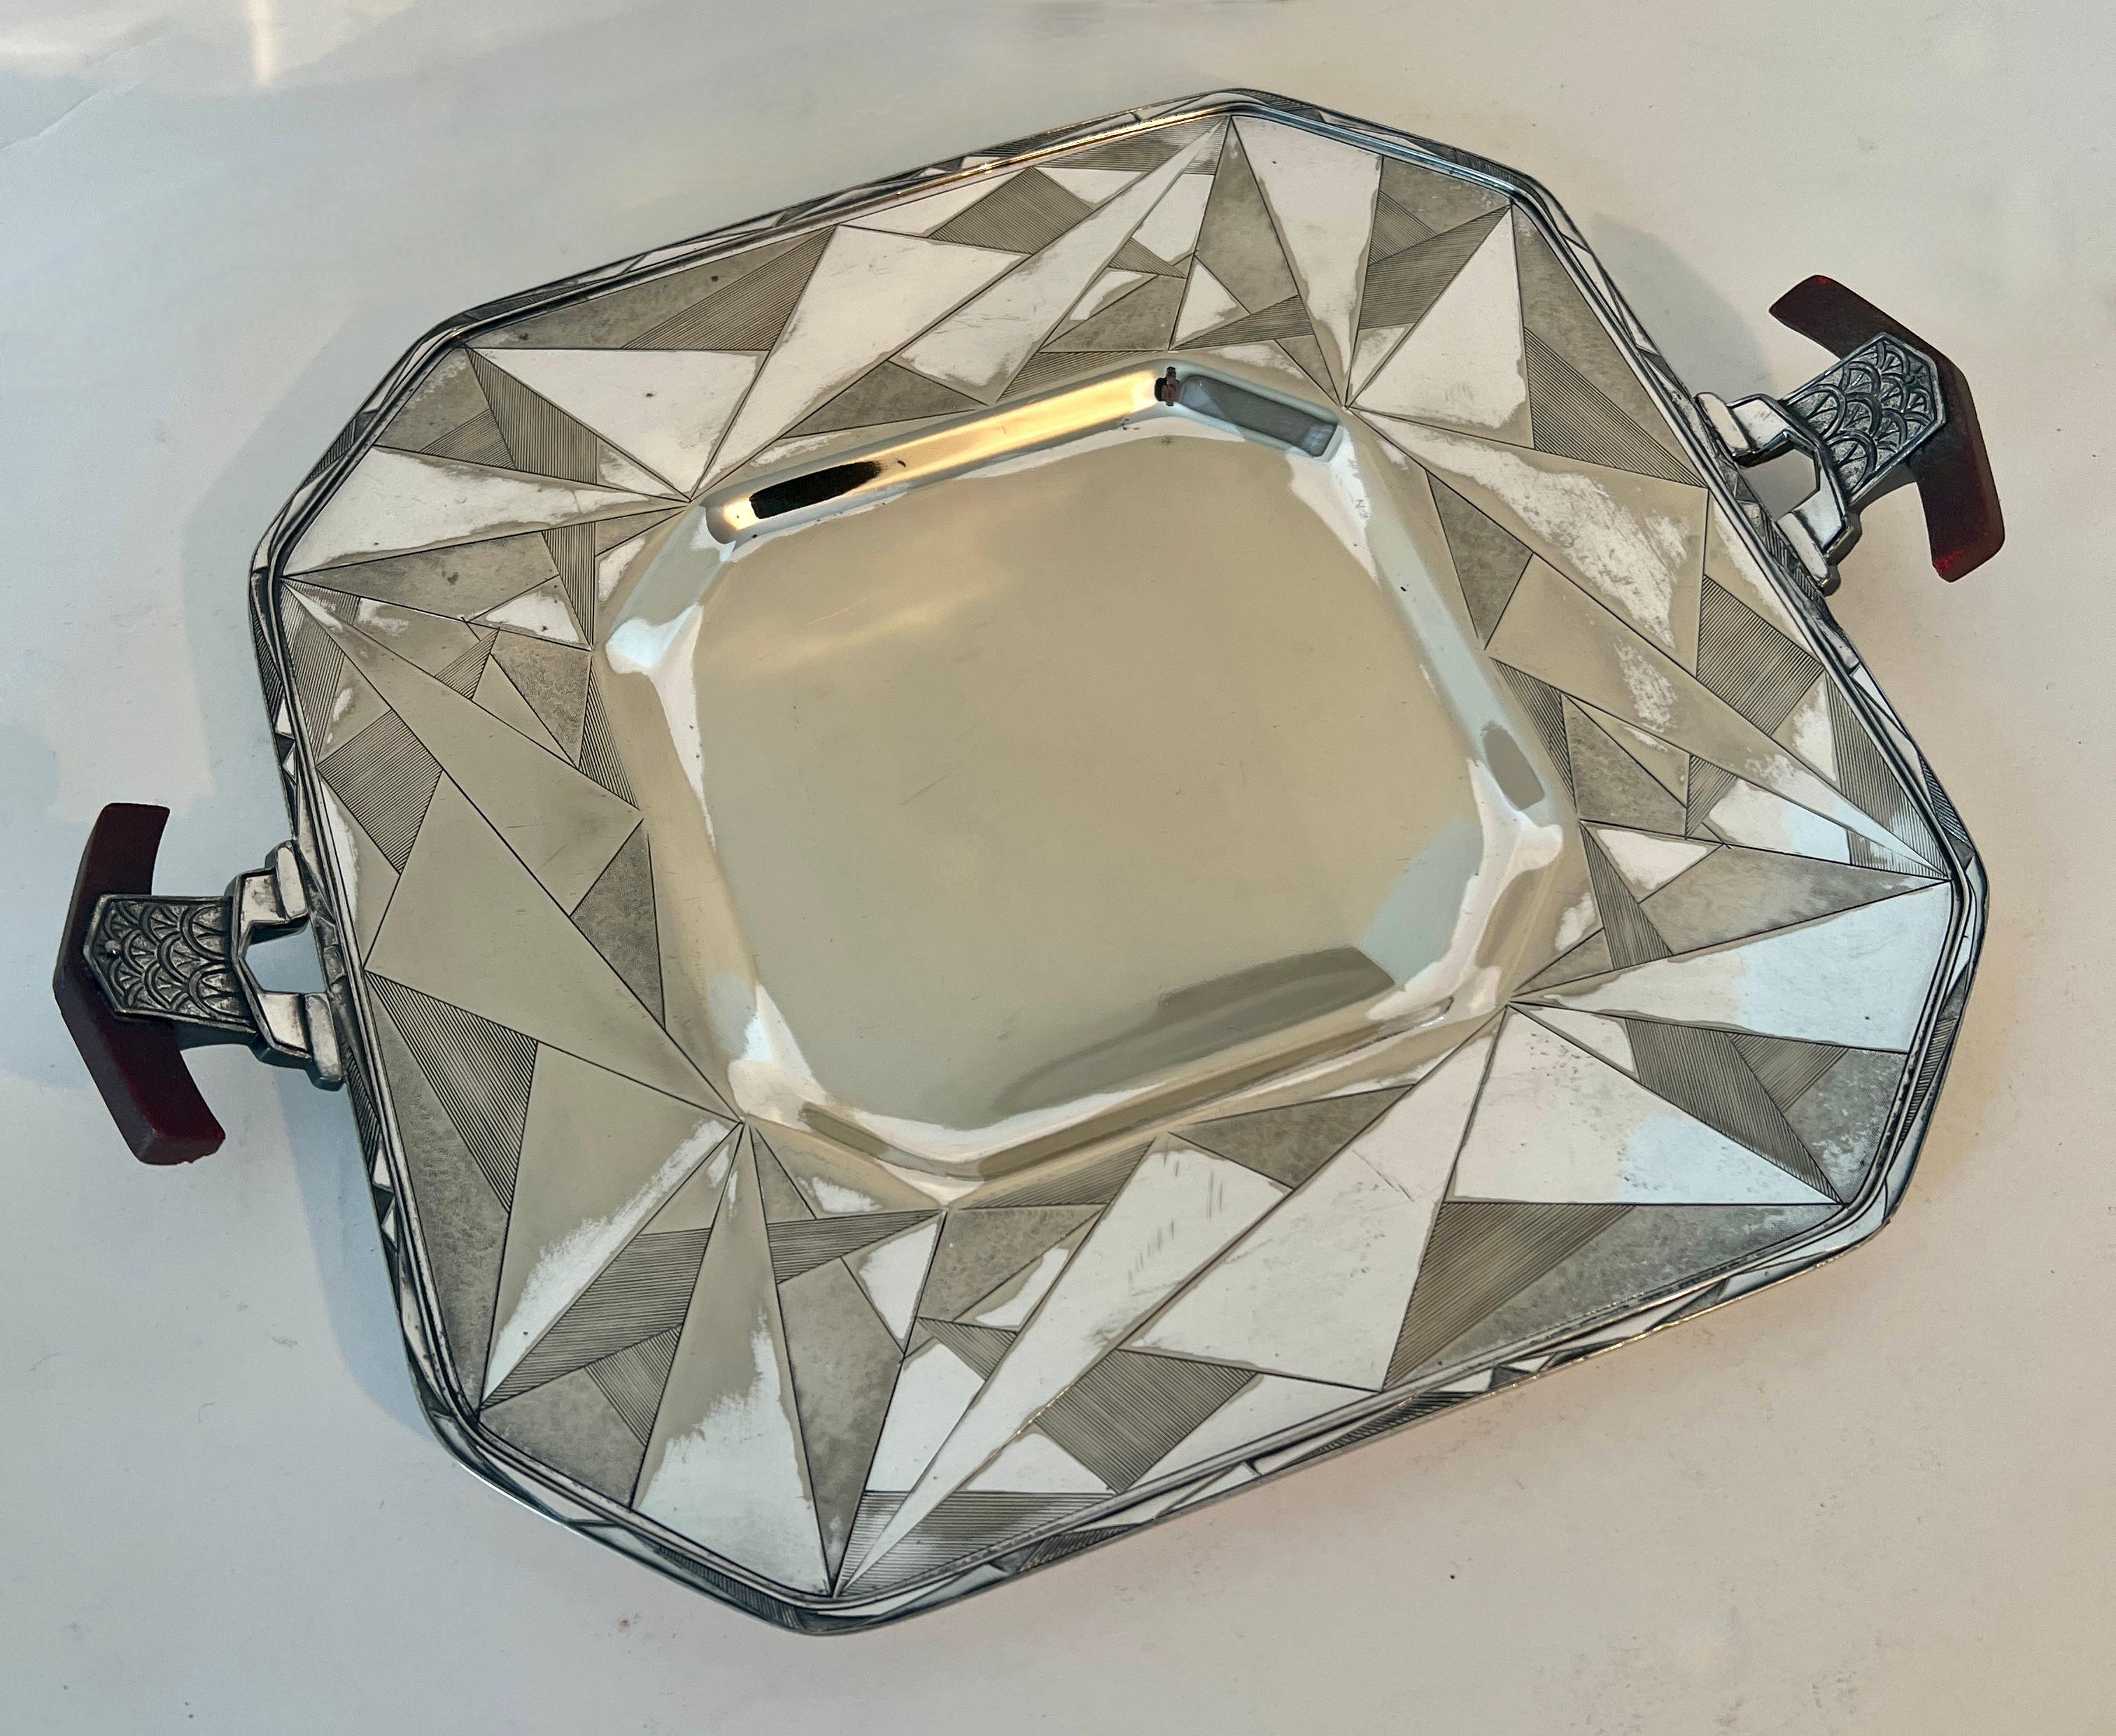 1920s Art Deco Silver Plate Benedict Geometric Tray with Bakelite Handles For Sale 1